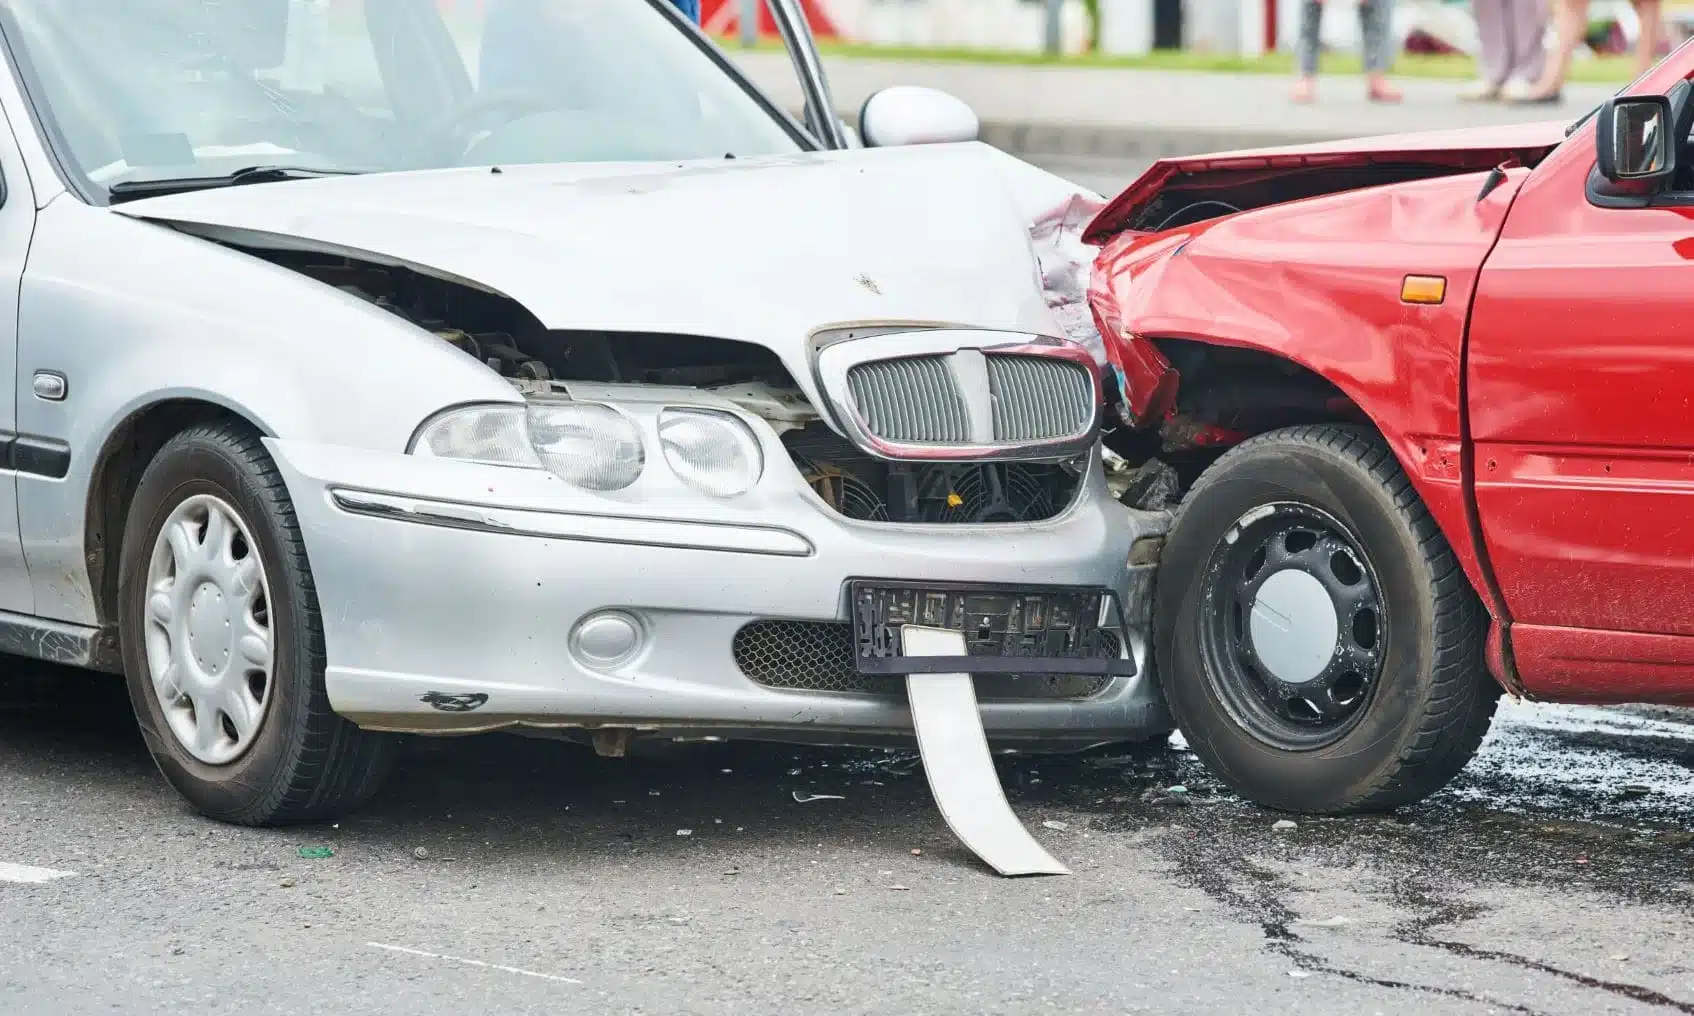 A car accident between a silver car and a red pickup truck on a road.